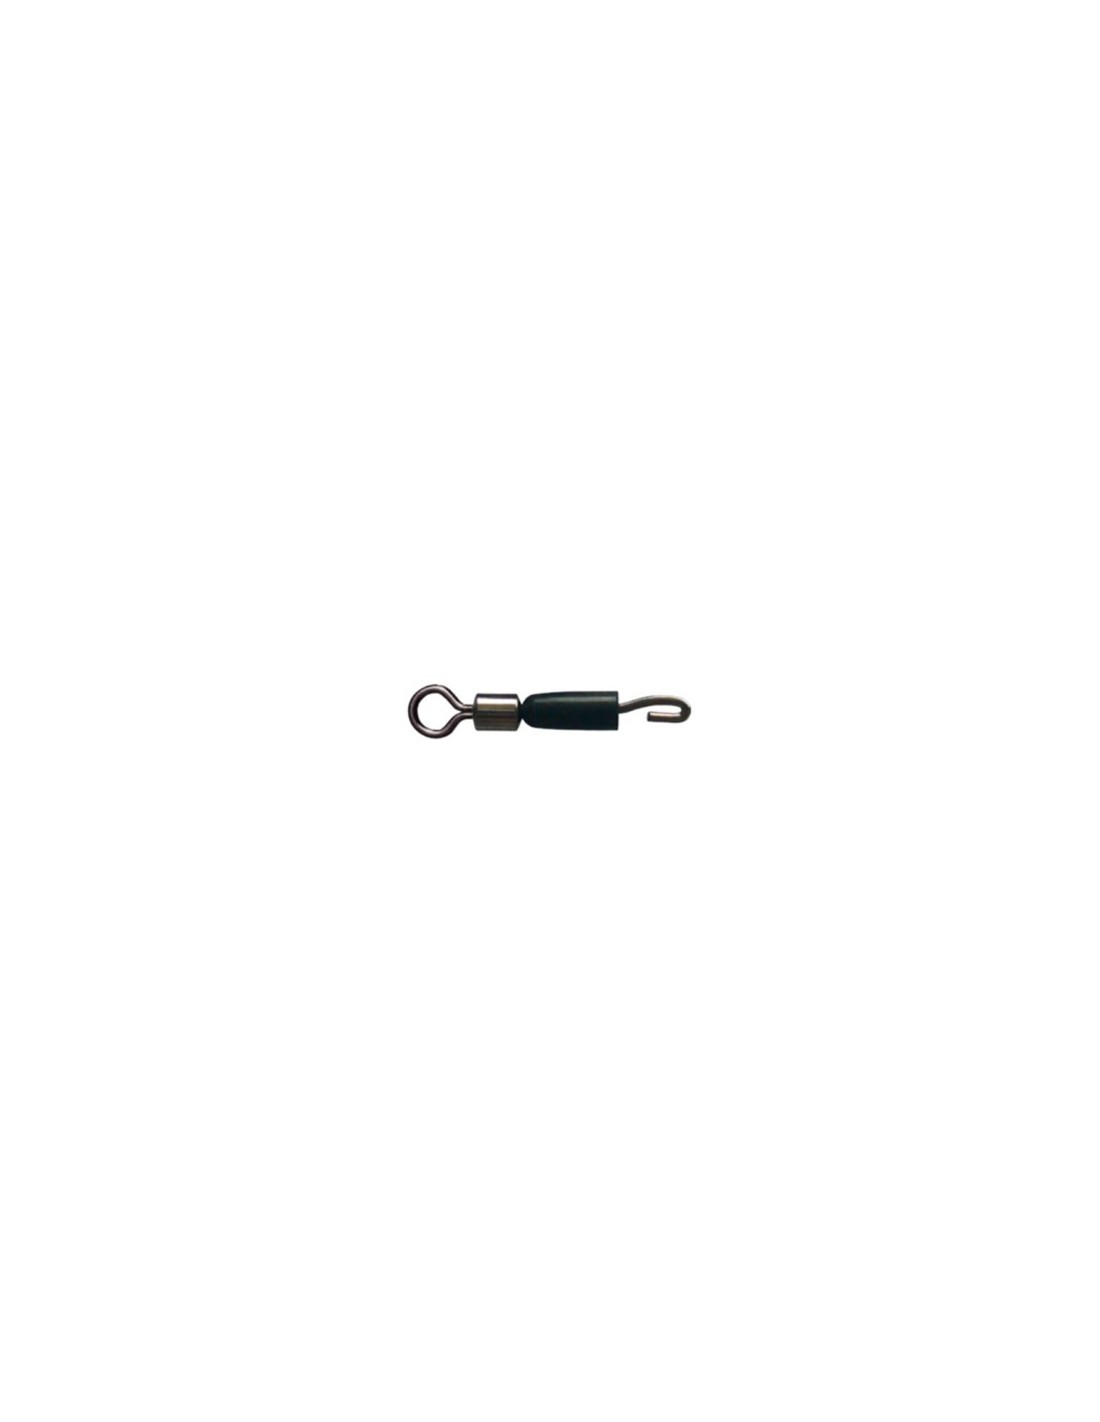 CRALUSSO MATCH ROLLING Quick Snap Swivels Fishing Terminal Tackle